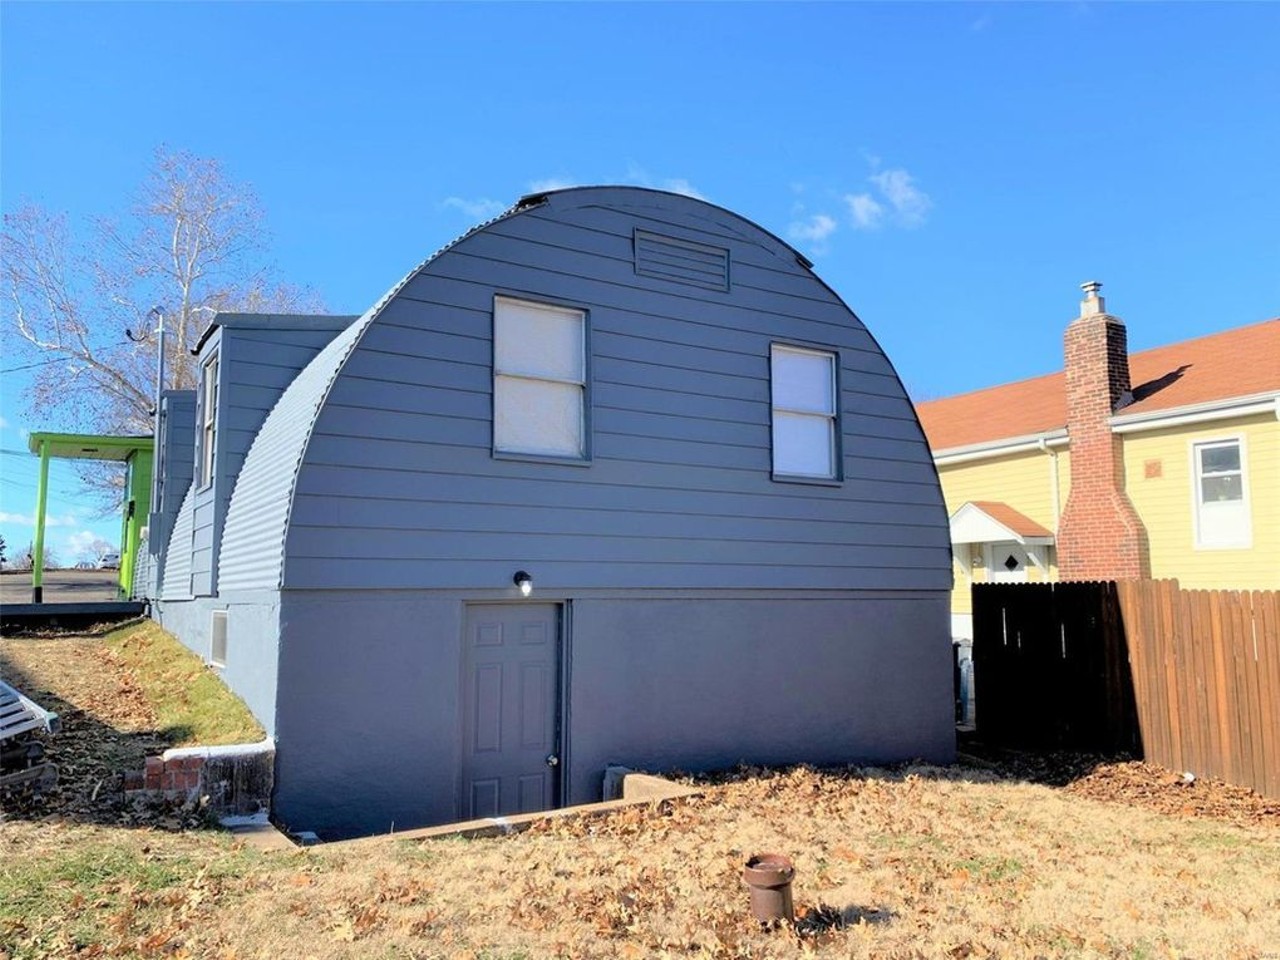 This Quonset Hut House Is One of the Coolest Buildings in Affton [PHOTOS]